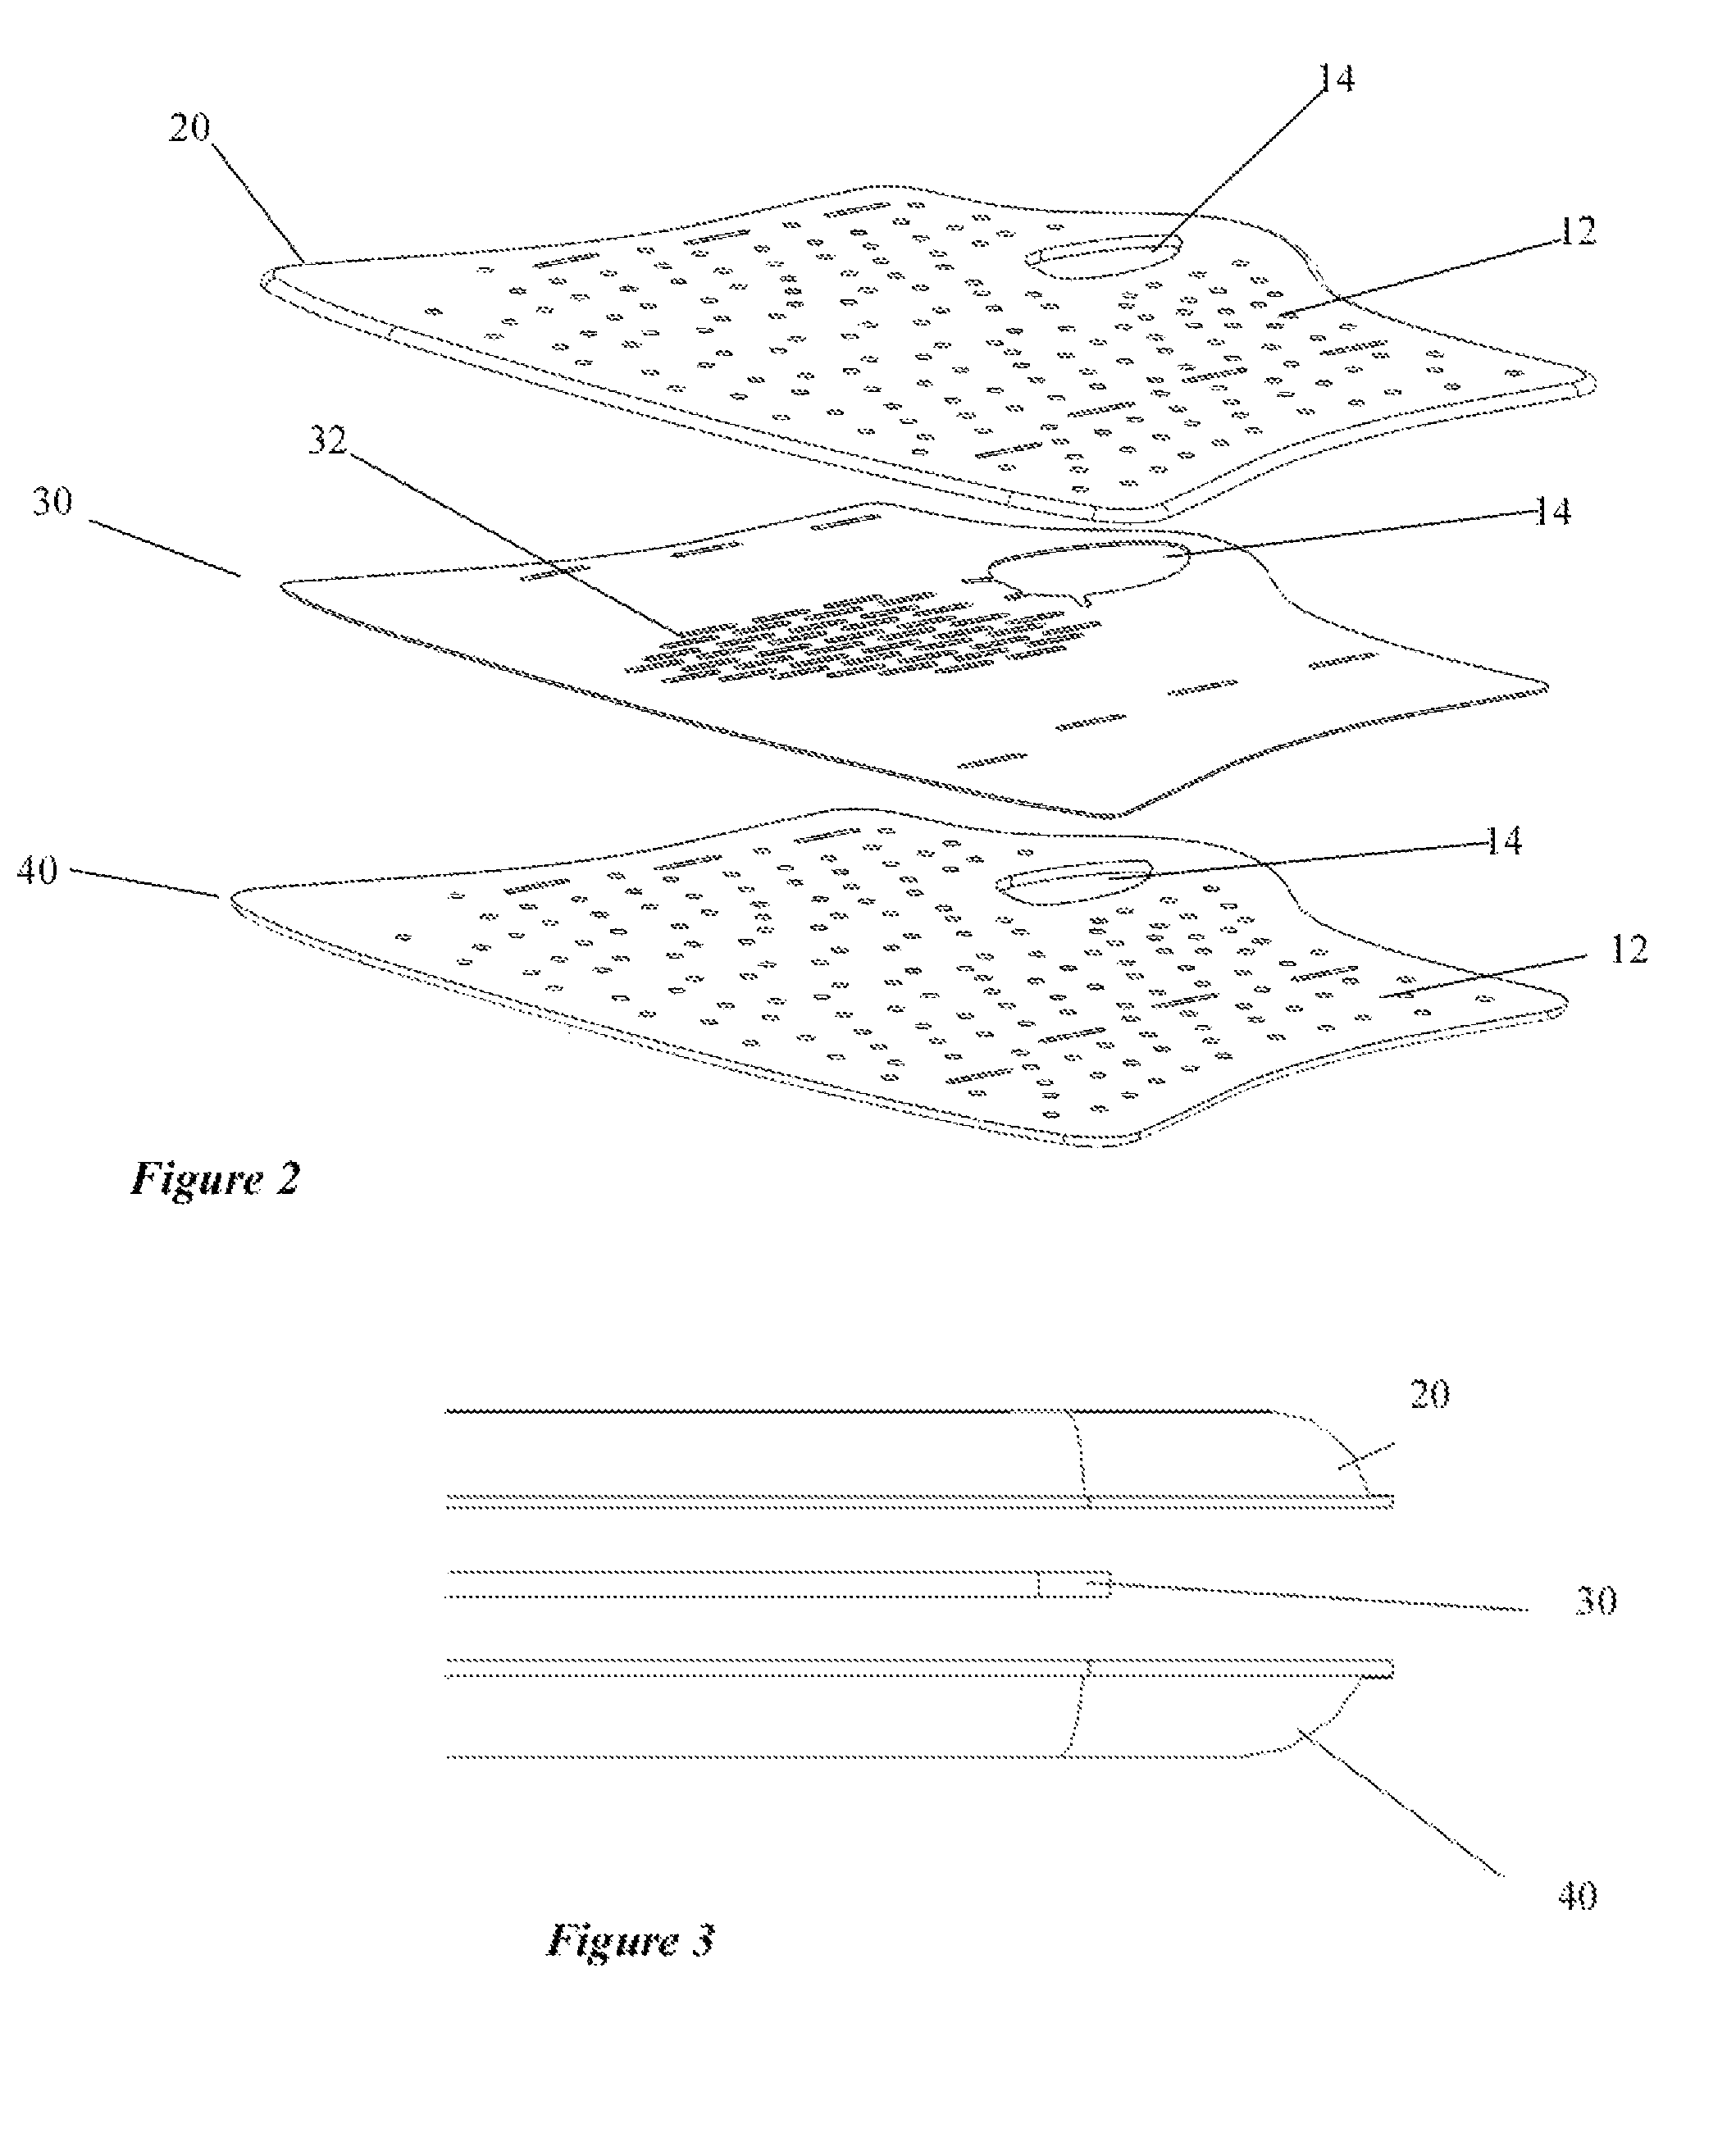 Orthopedic system for immobilizing and supporting body parts